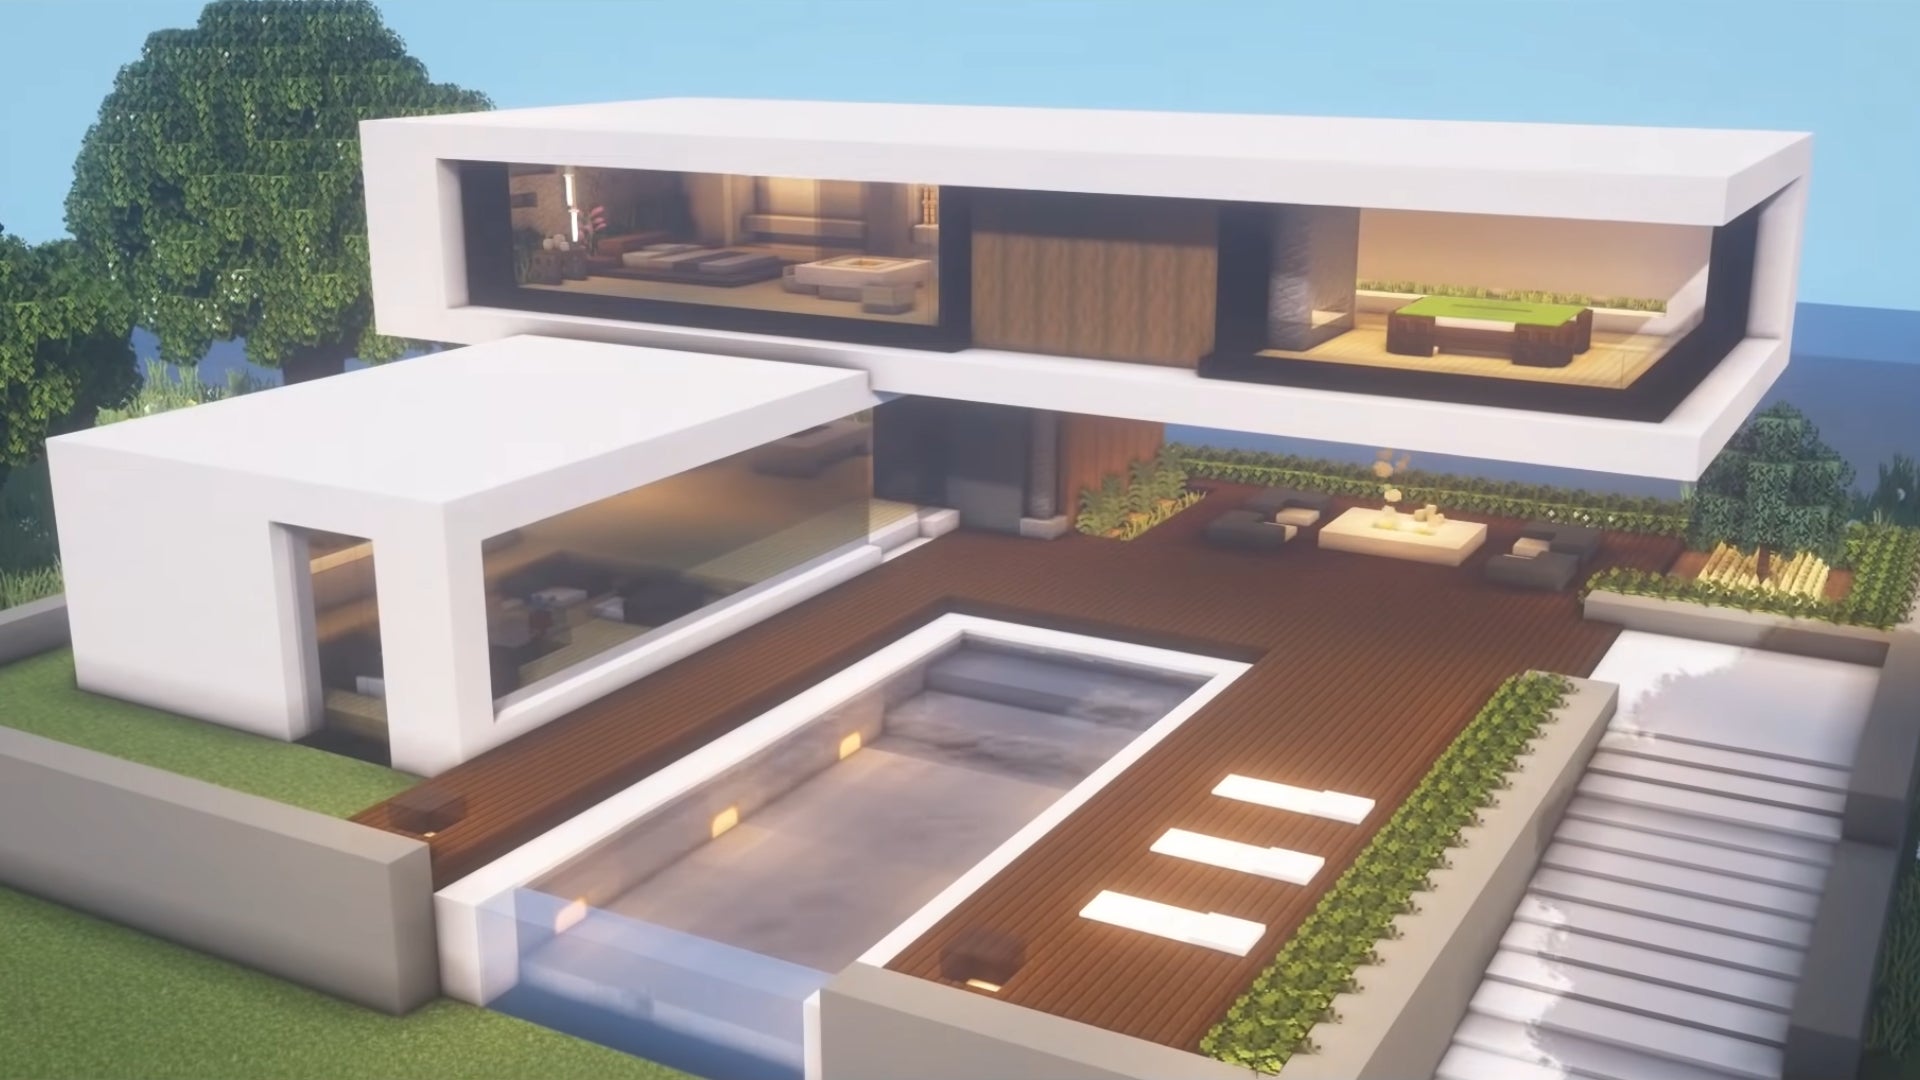 A modern house in Minecraft, built by YouTuber JINTUBE.